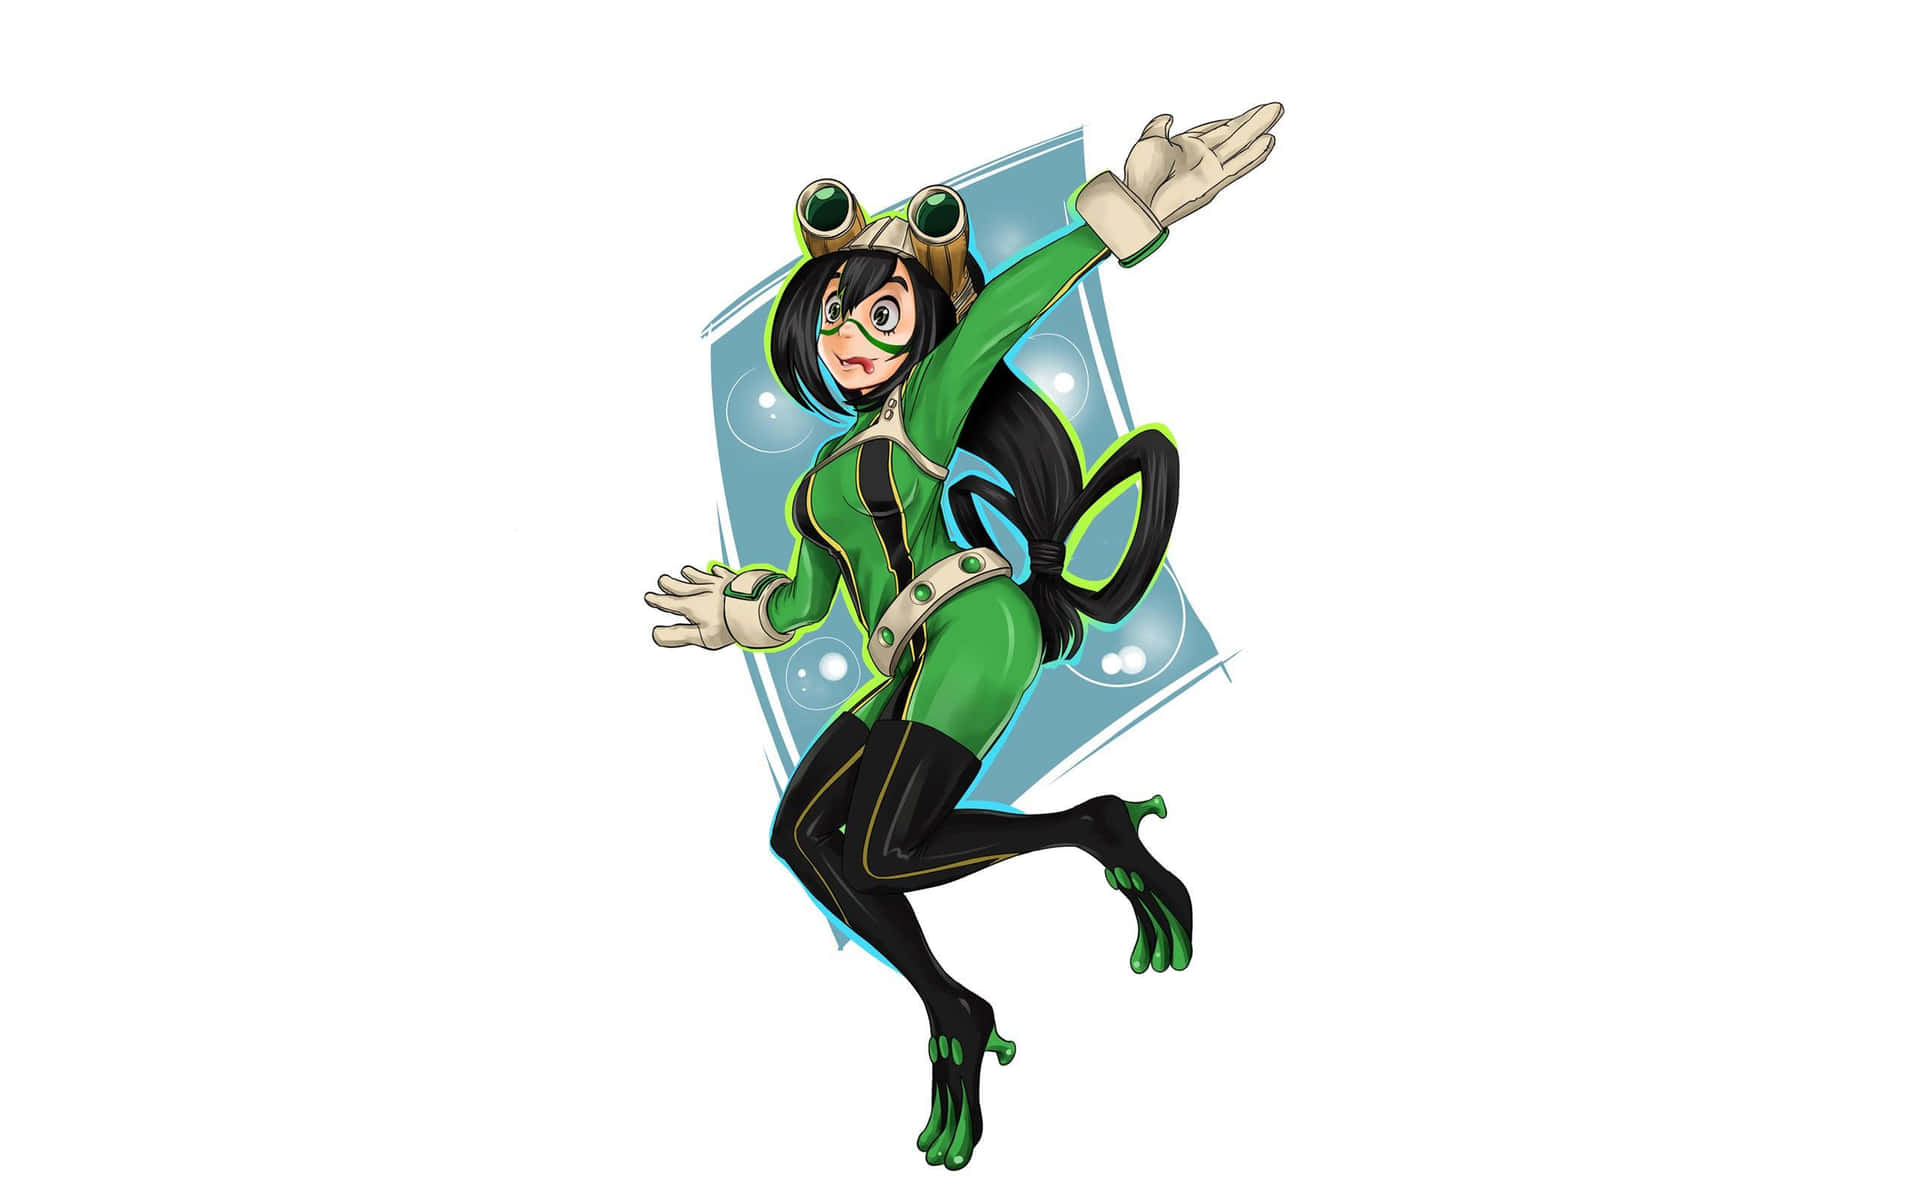 Froppy spreads happiness and joy